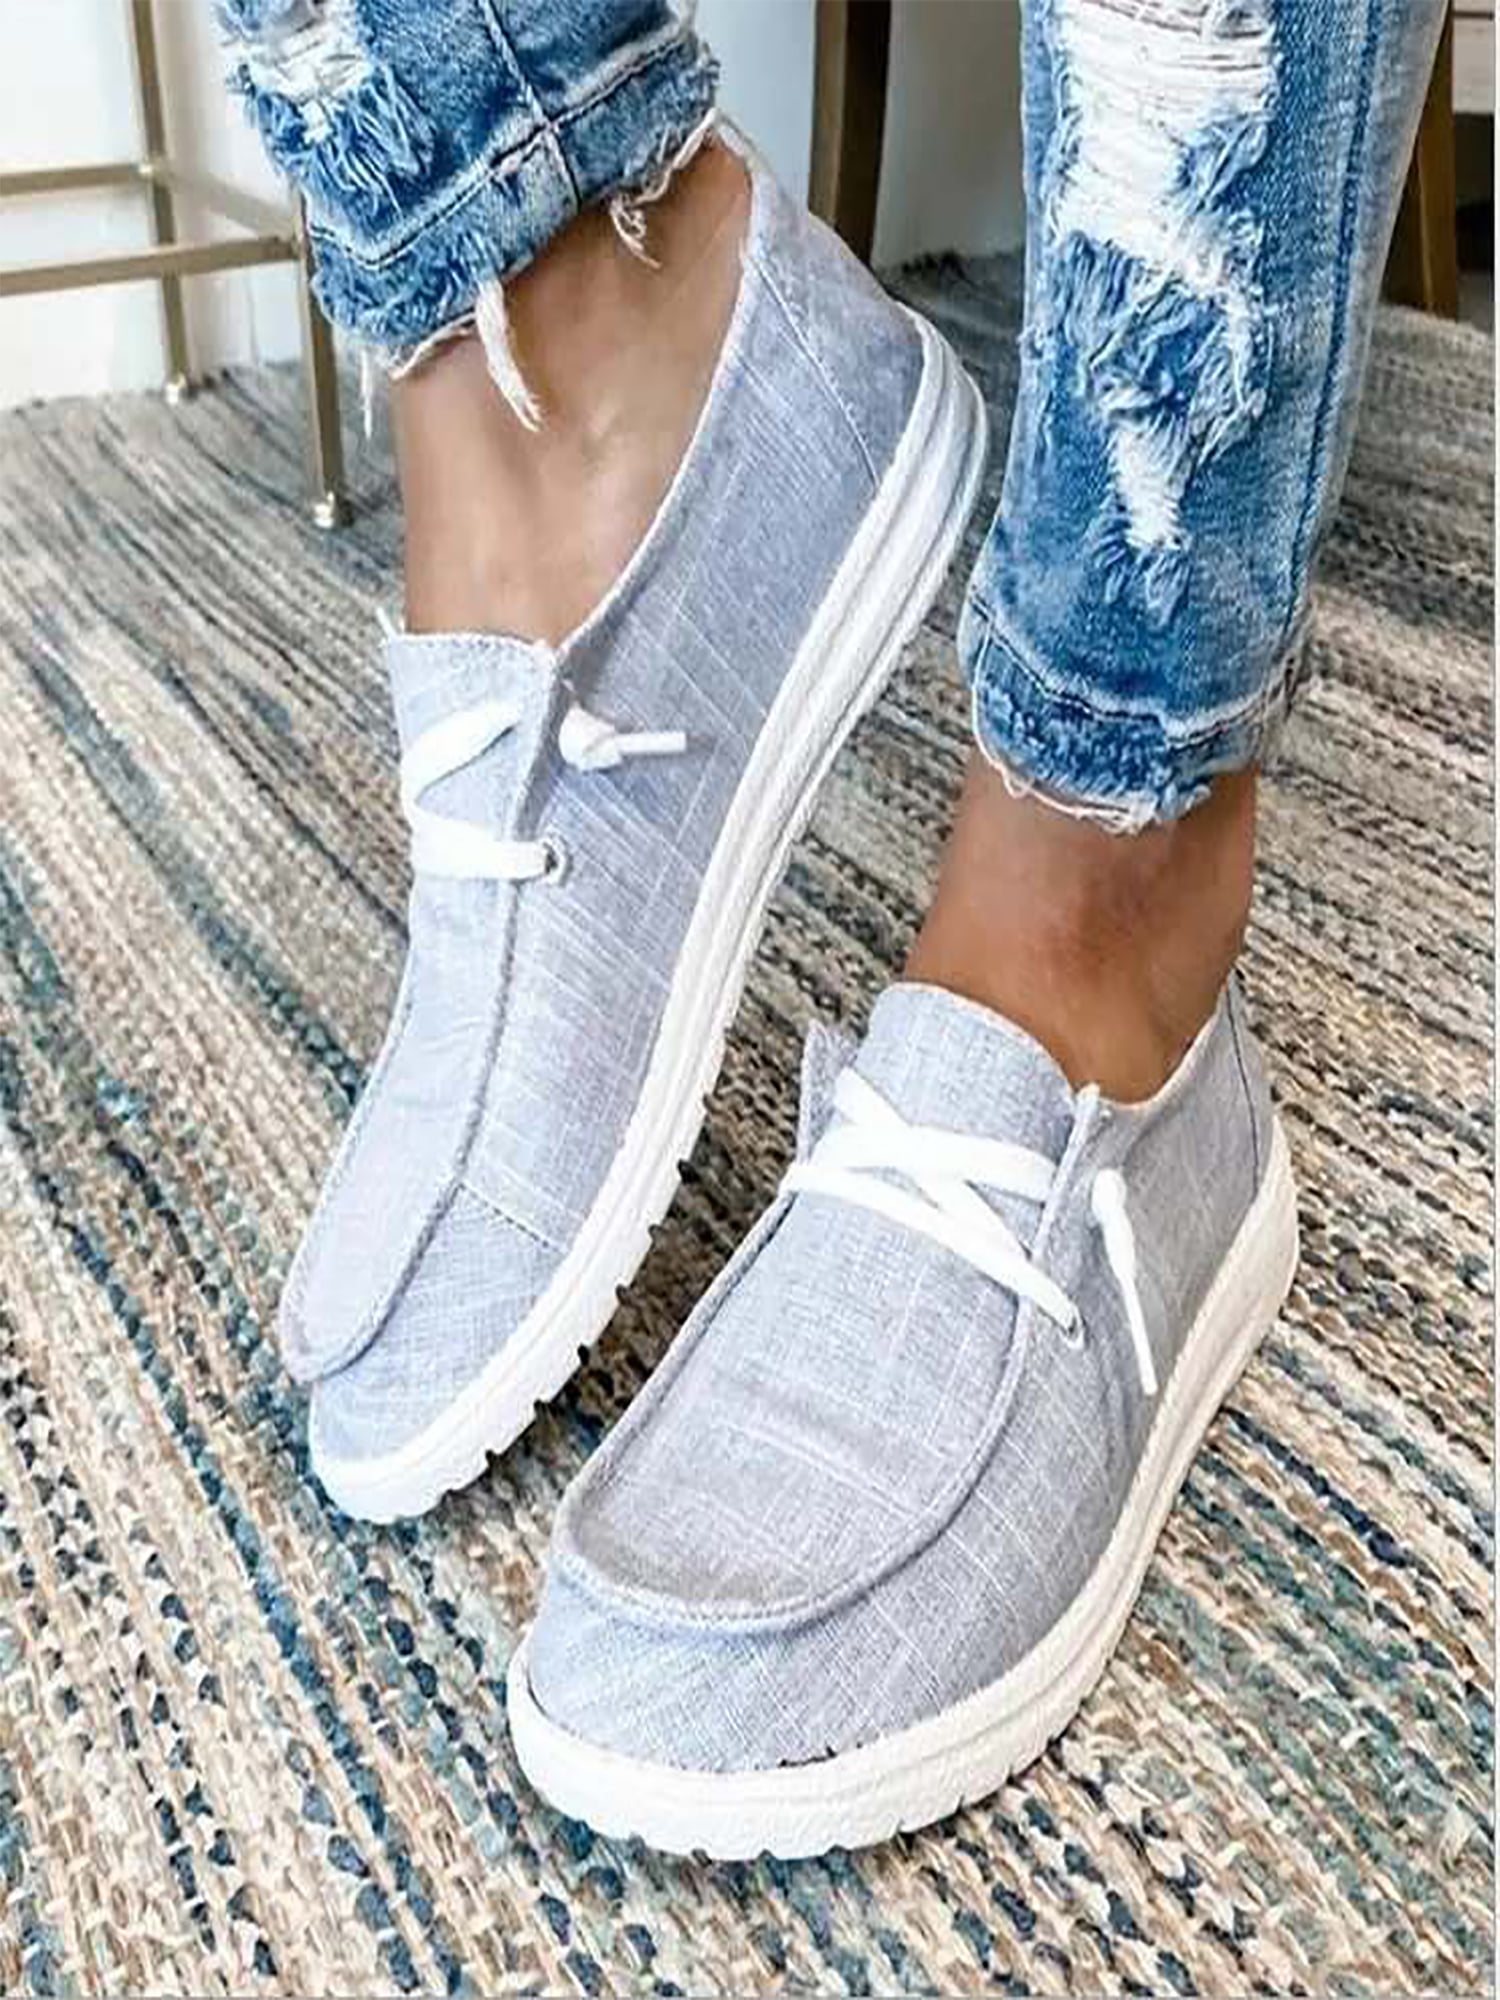 Men Shoes Sneakers Animal Aquatic Arrangement Canvas Slip-on Casual Printing Comfortable Low Top Fun Canvas Shoes for Women 